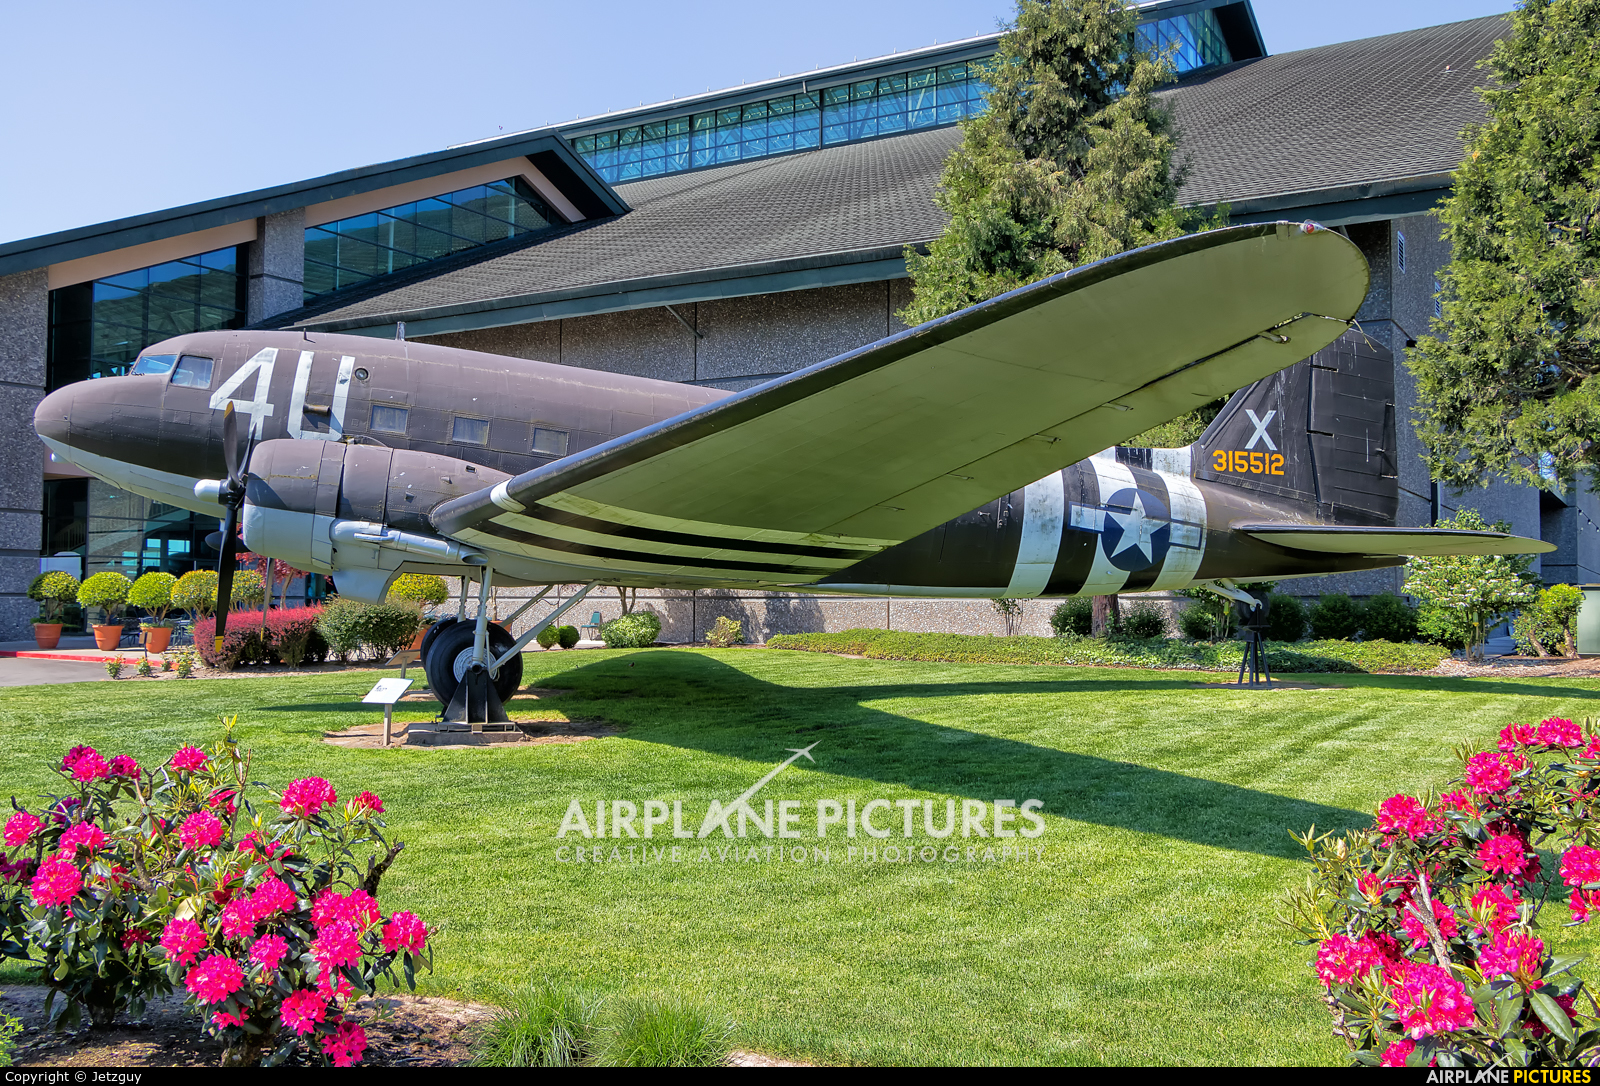 USA - Air Force 315512 aircraft at McMinnville - Evergreen Aviation & Space Museum